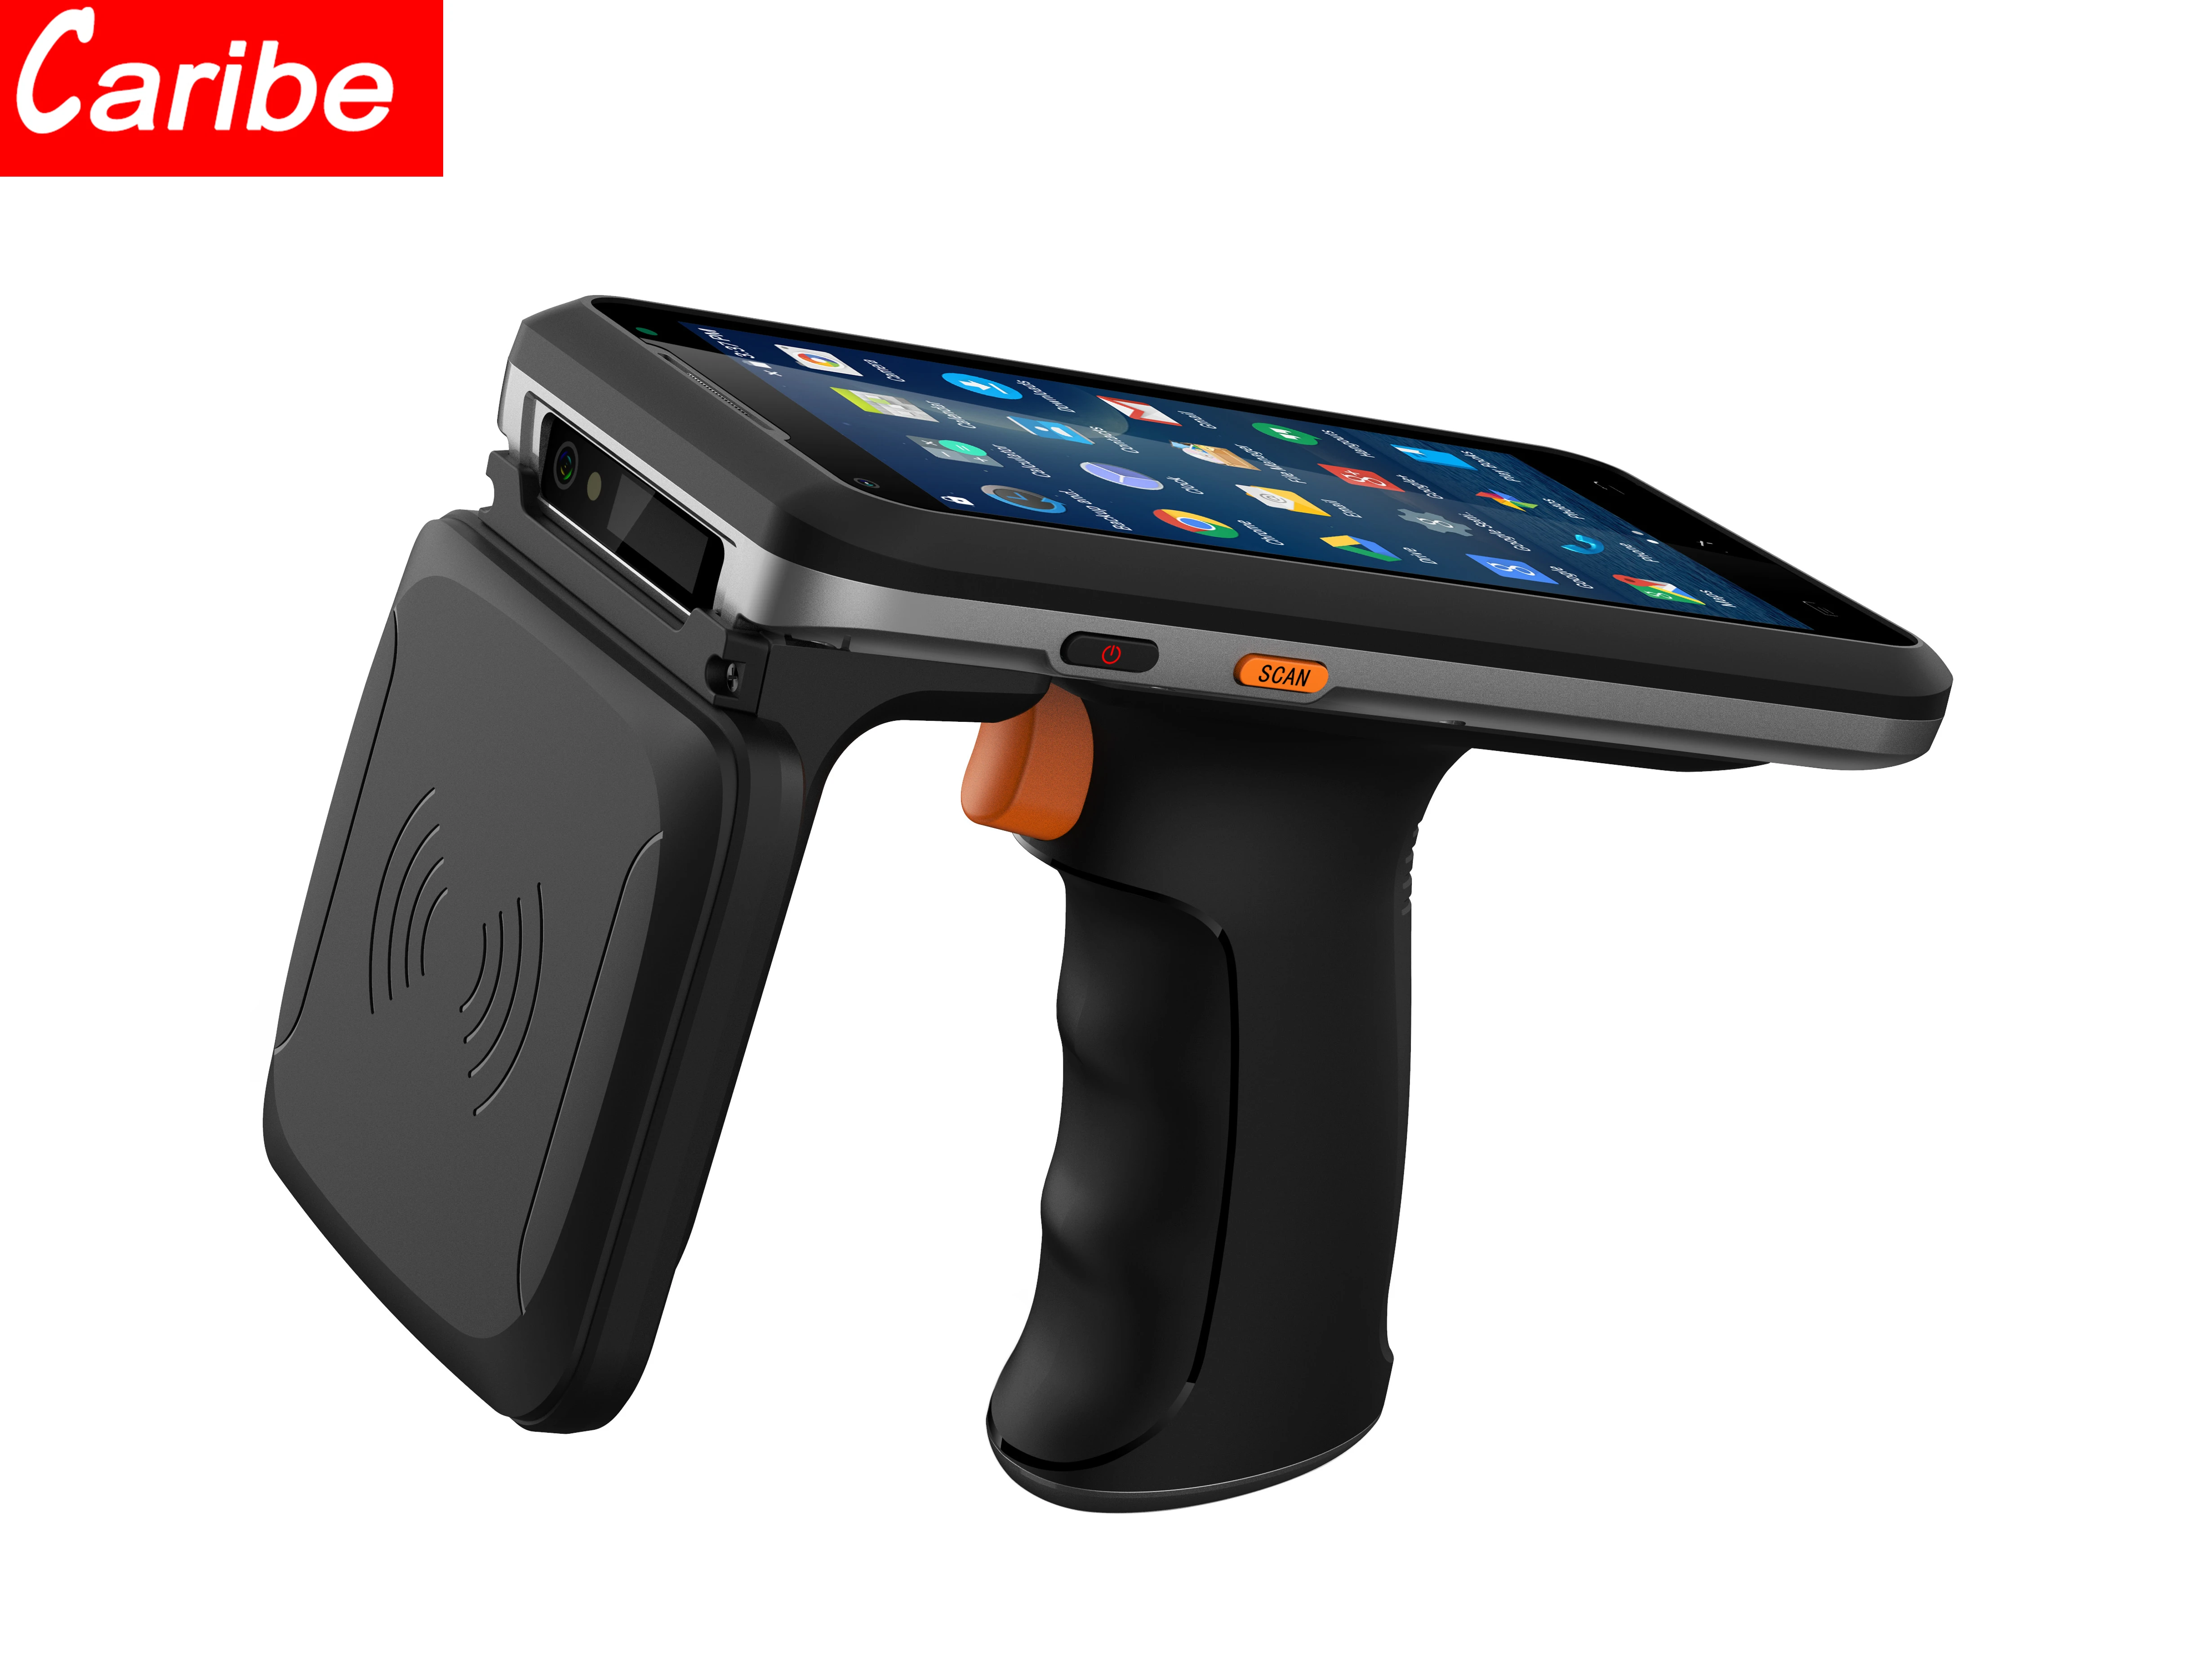 

CARIBE Android 8.1 Mobile Data Collector IP66 Rugged Handheld PDA 1D 2D Barcode Scanner UHF RFID Reader